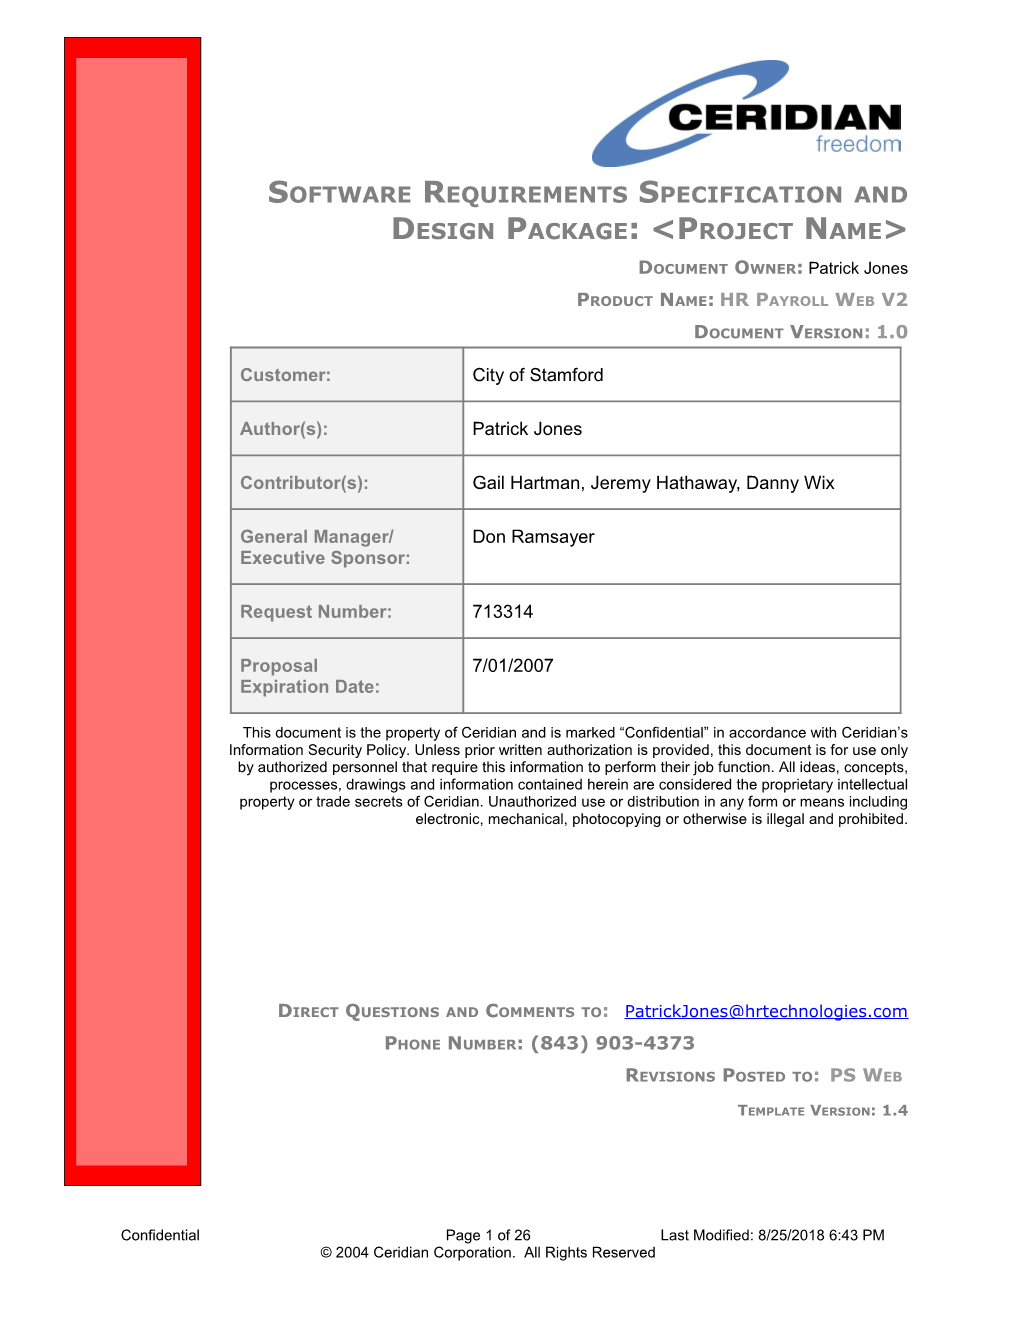 Software Requirements Specification and Design Package